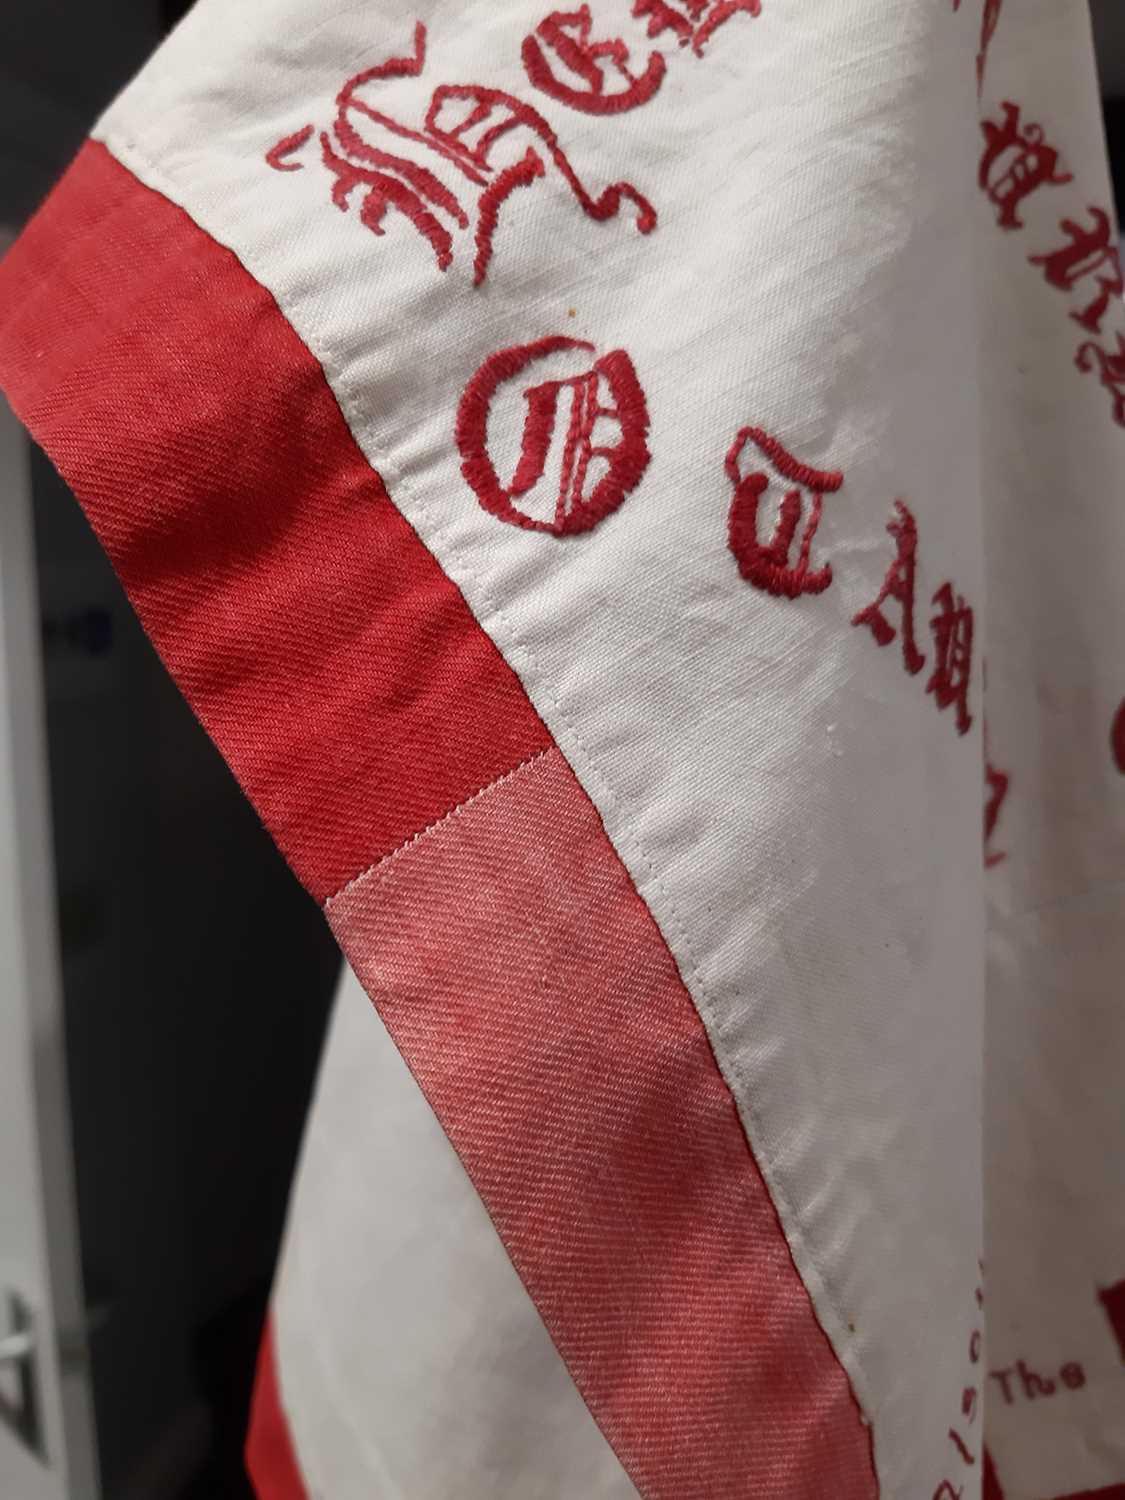 A WW1 Otautau Quilt made by members of the Red Cross in Otautau, New Zealand. - Image 11 of 11